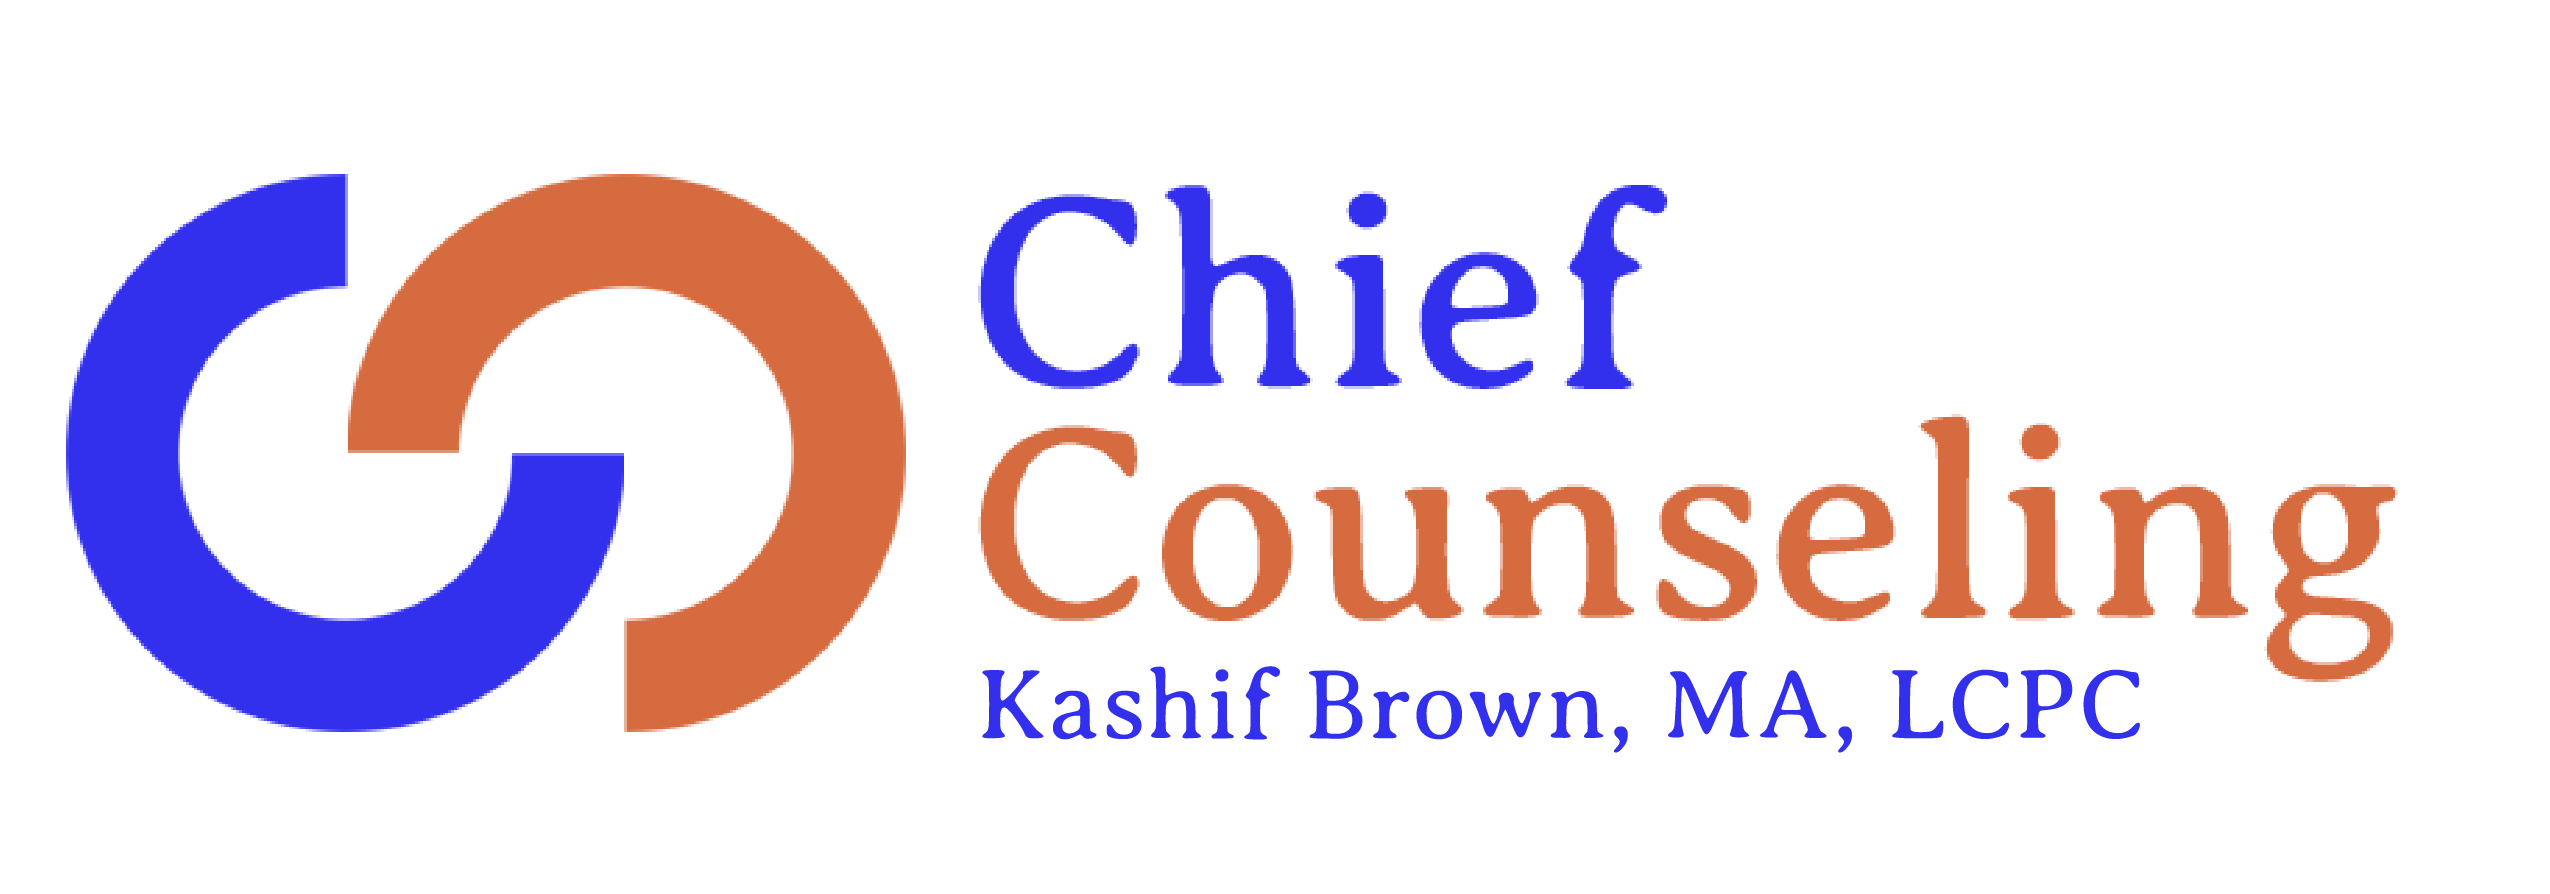 Chief Counseling